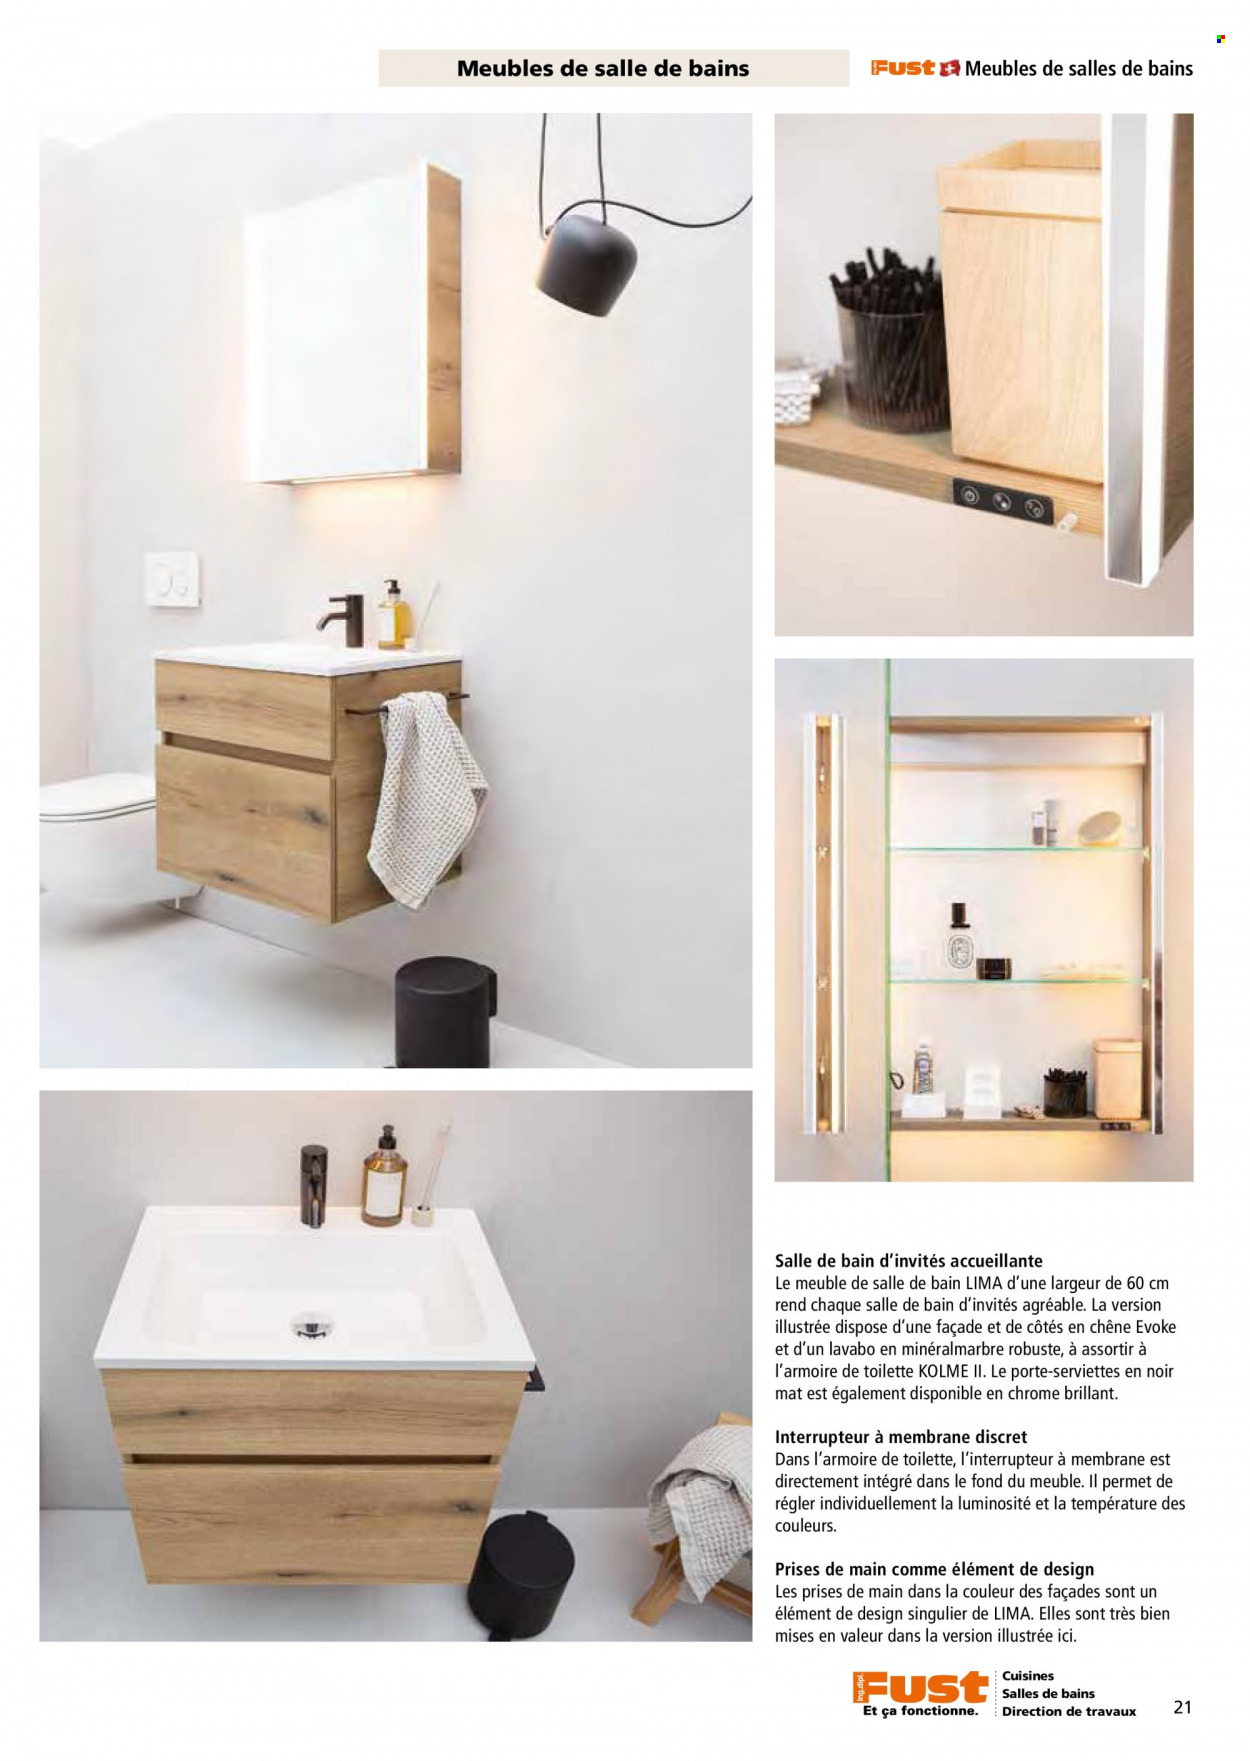 Catalogue Fust. Page 21.